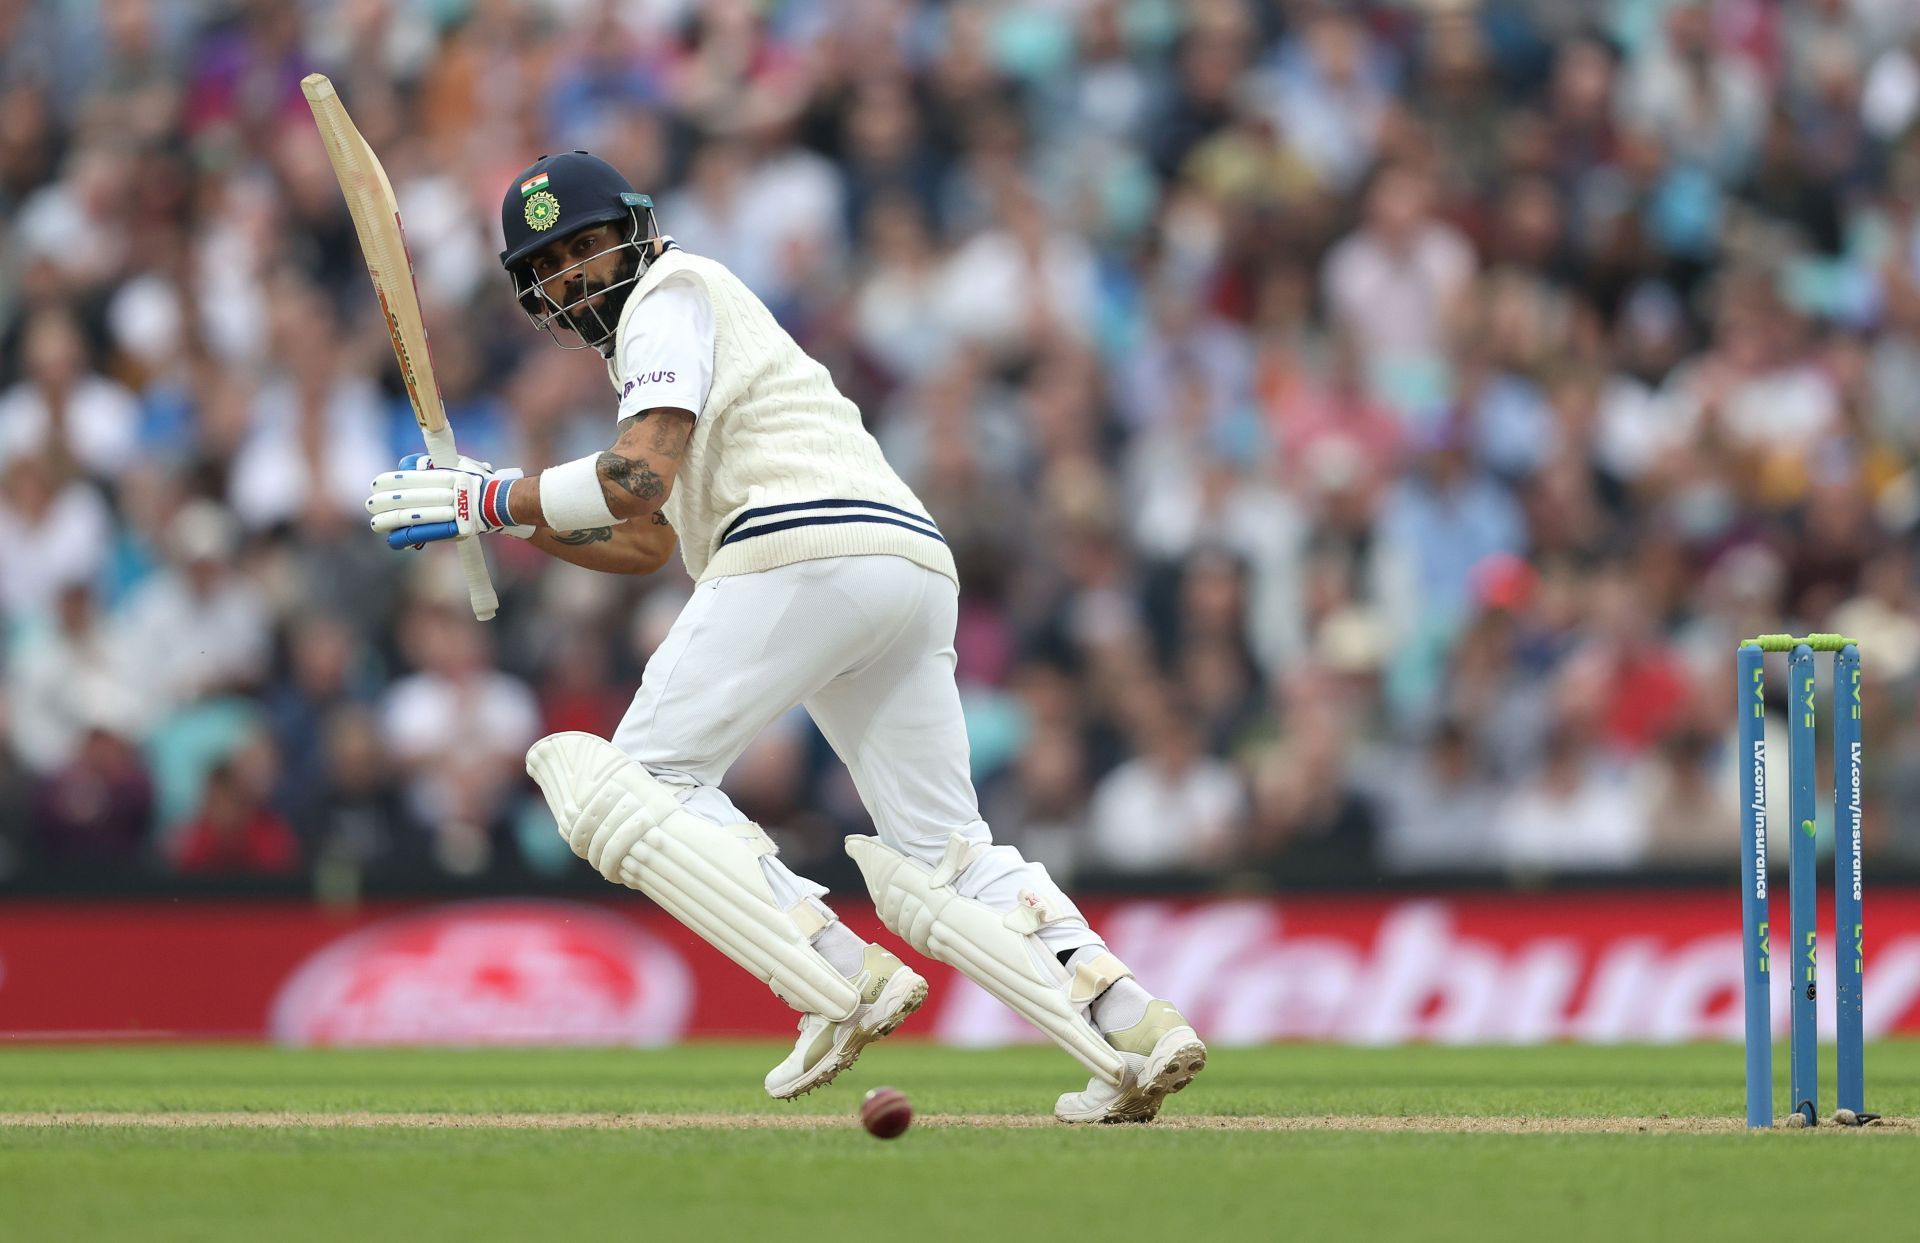 Virat Kohli was rested for the first Test against New Zealand